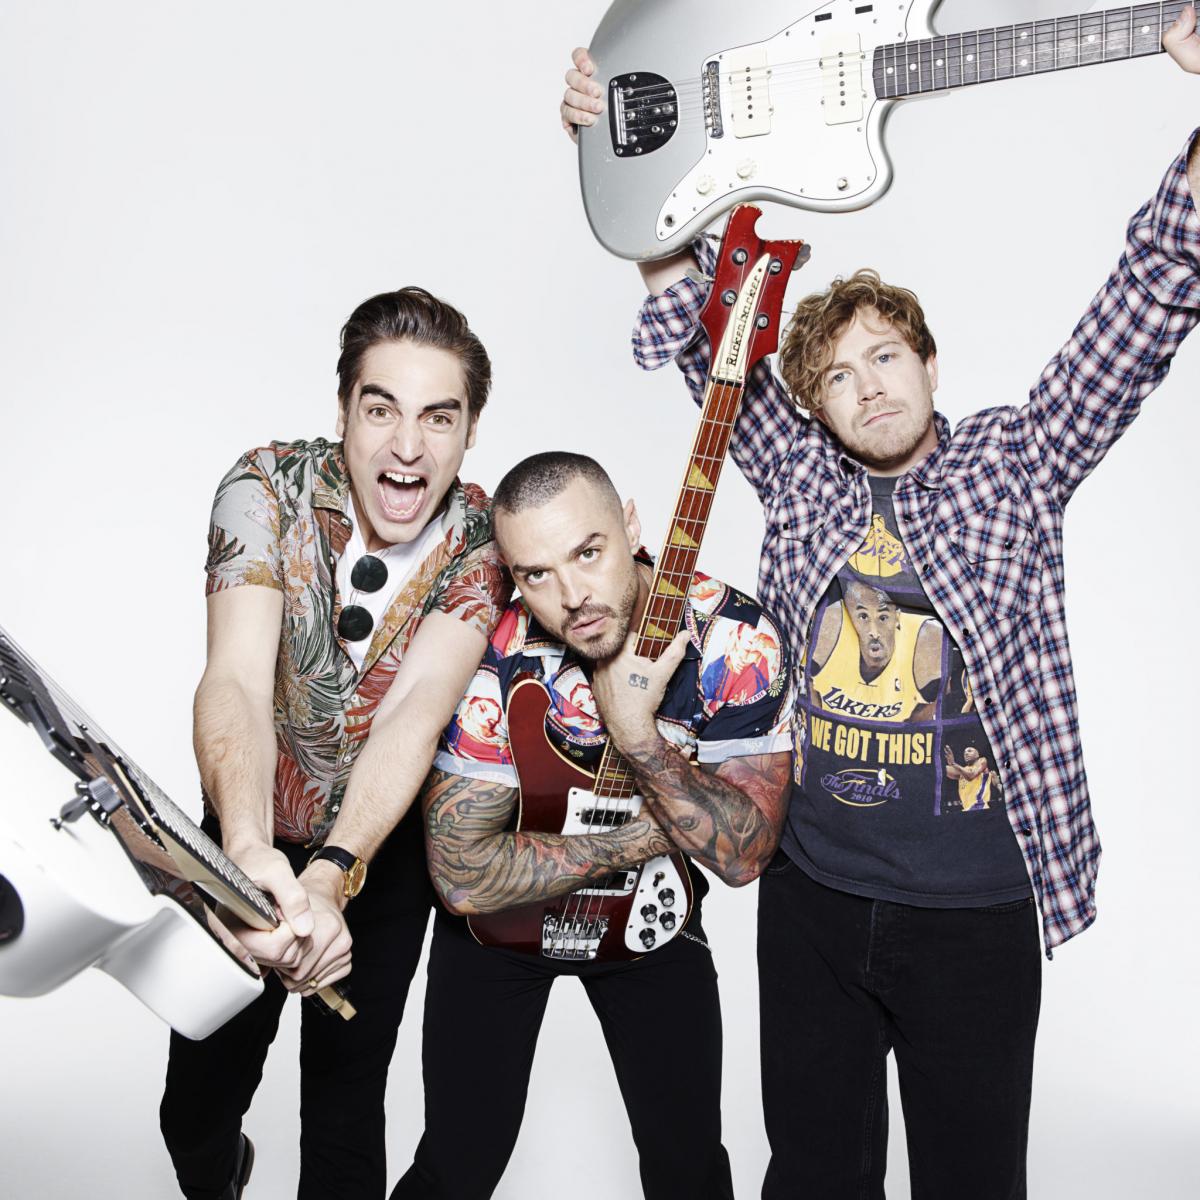 Ahead of UK tour Busted release new music video for latest single 'Radio'